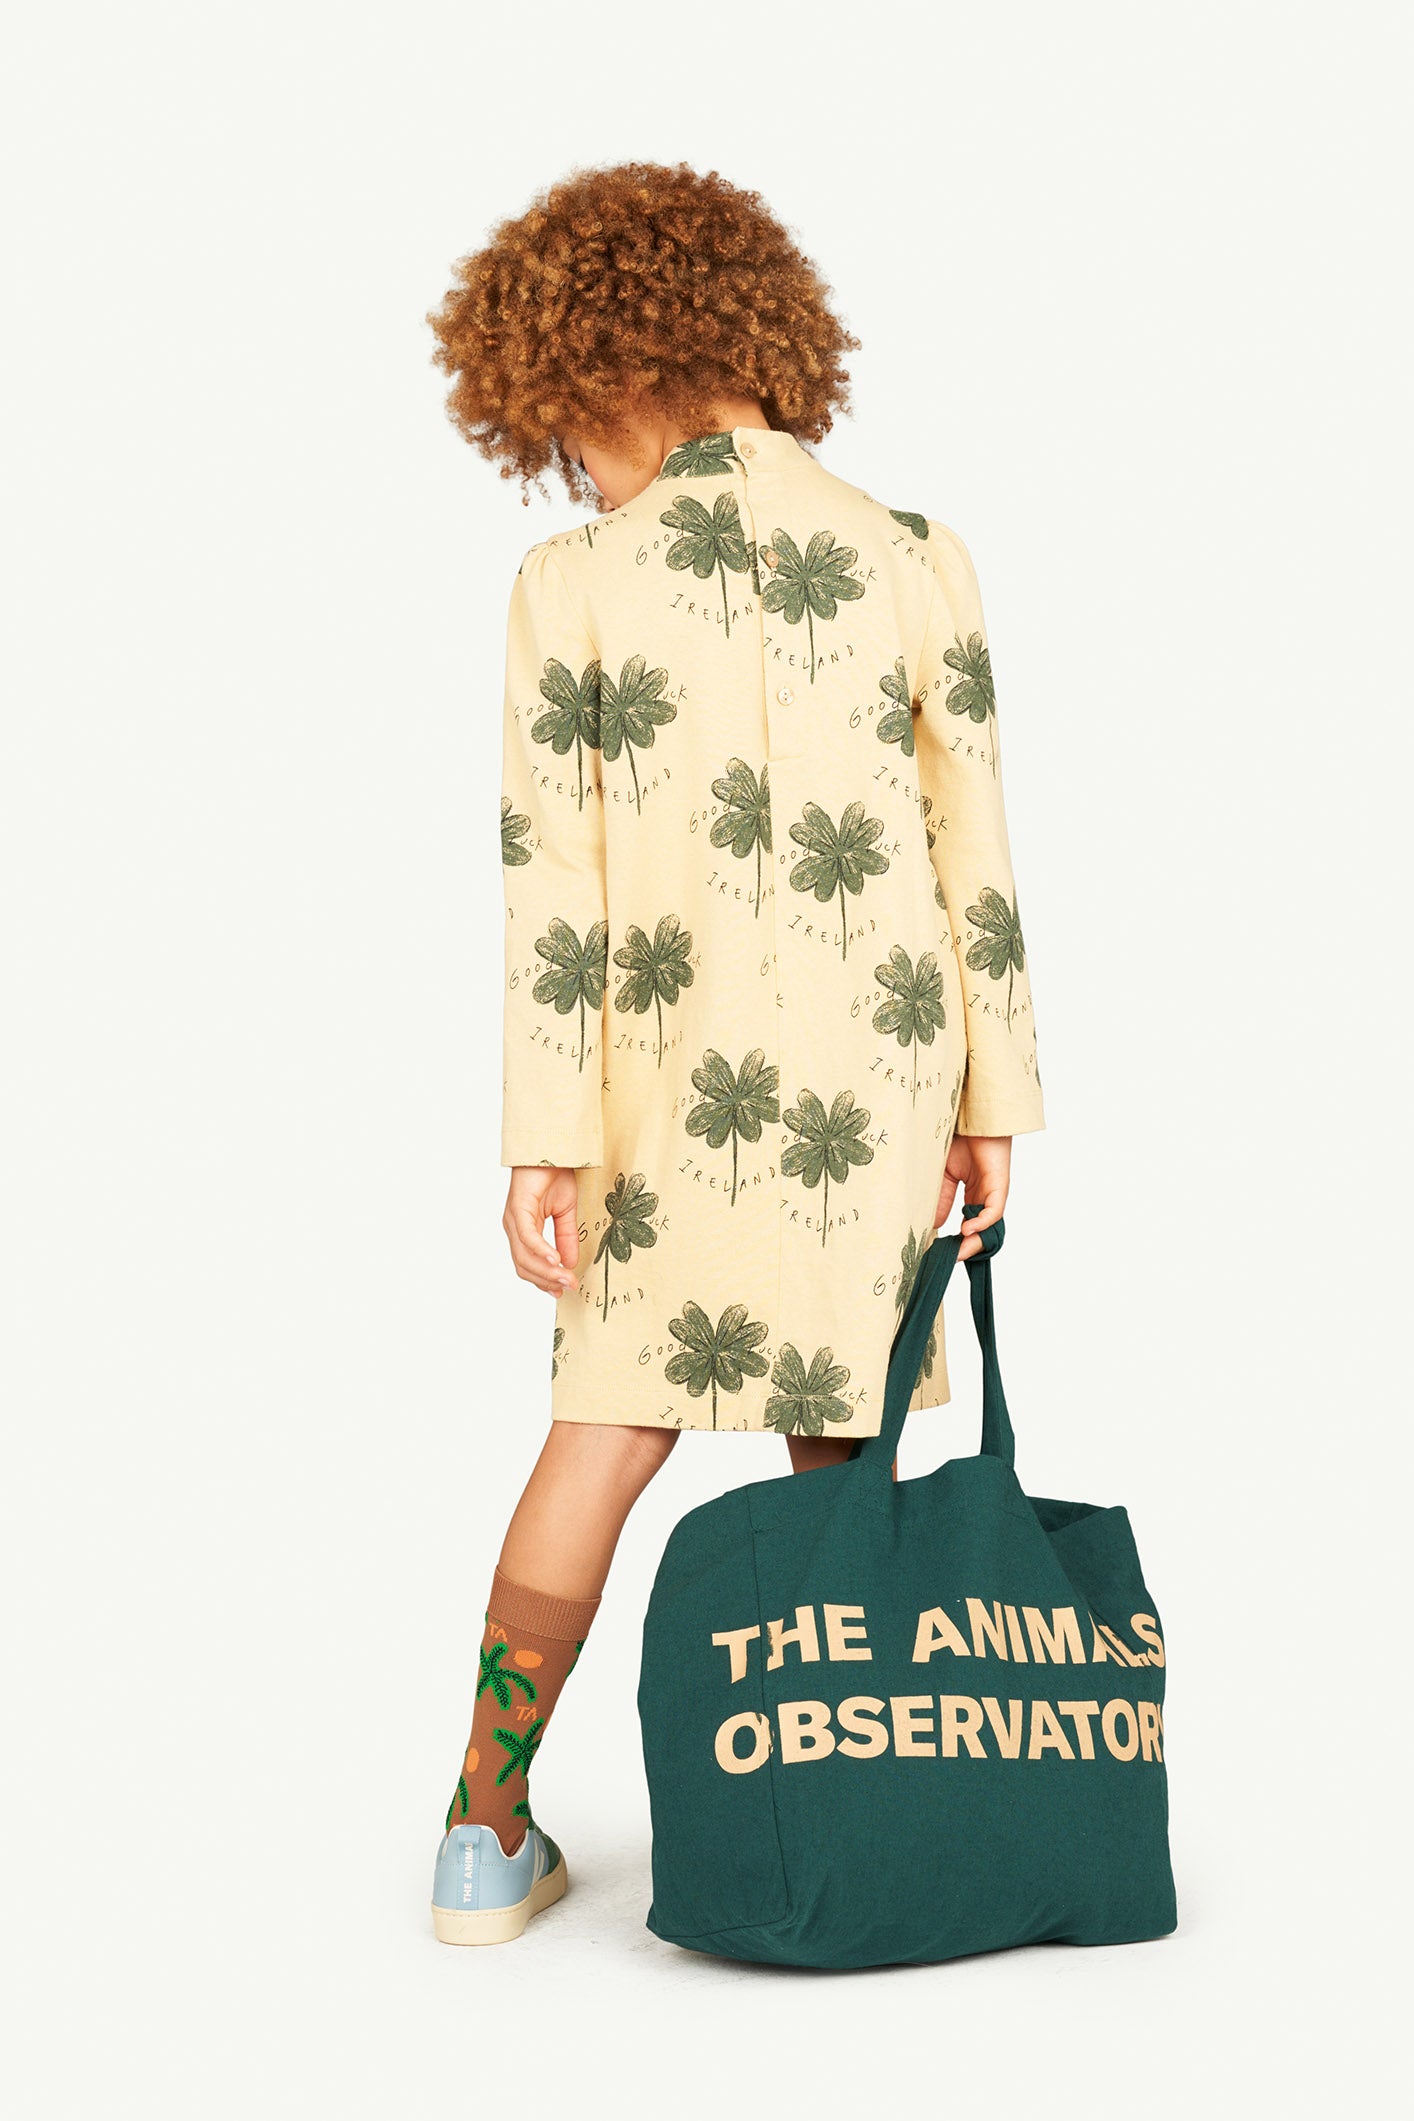 The Animals Observatory bag